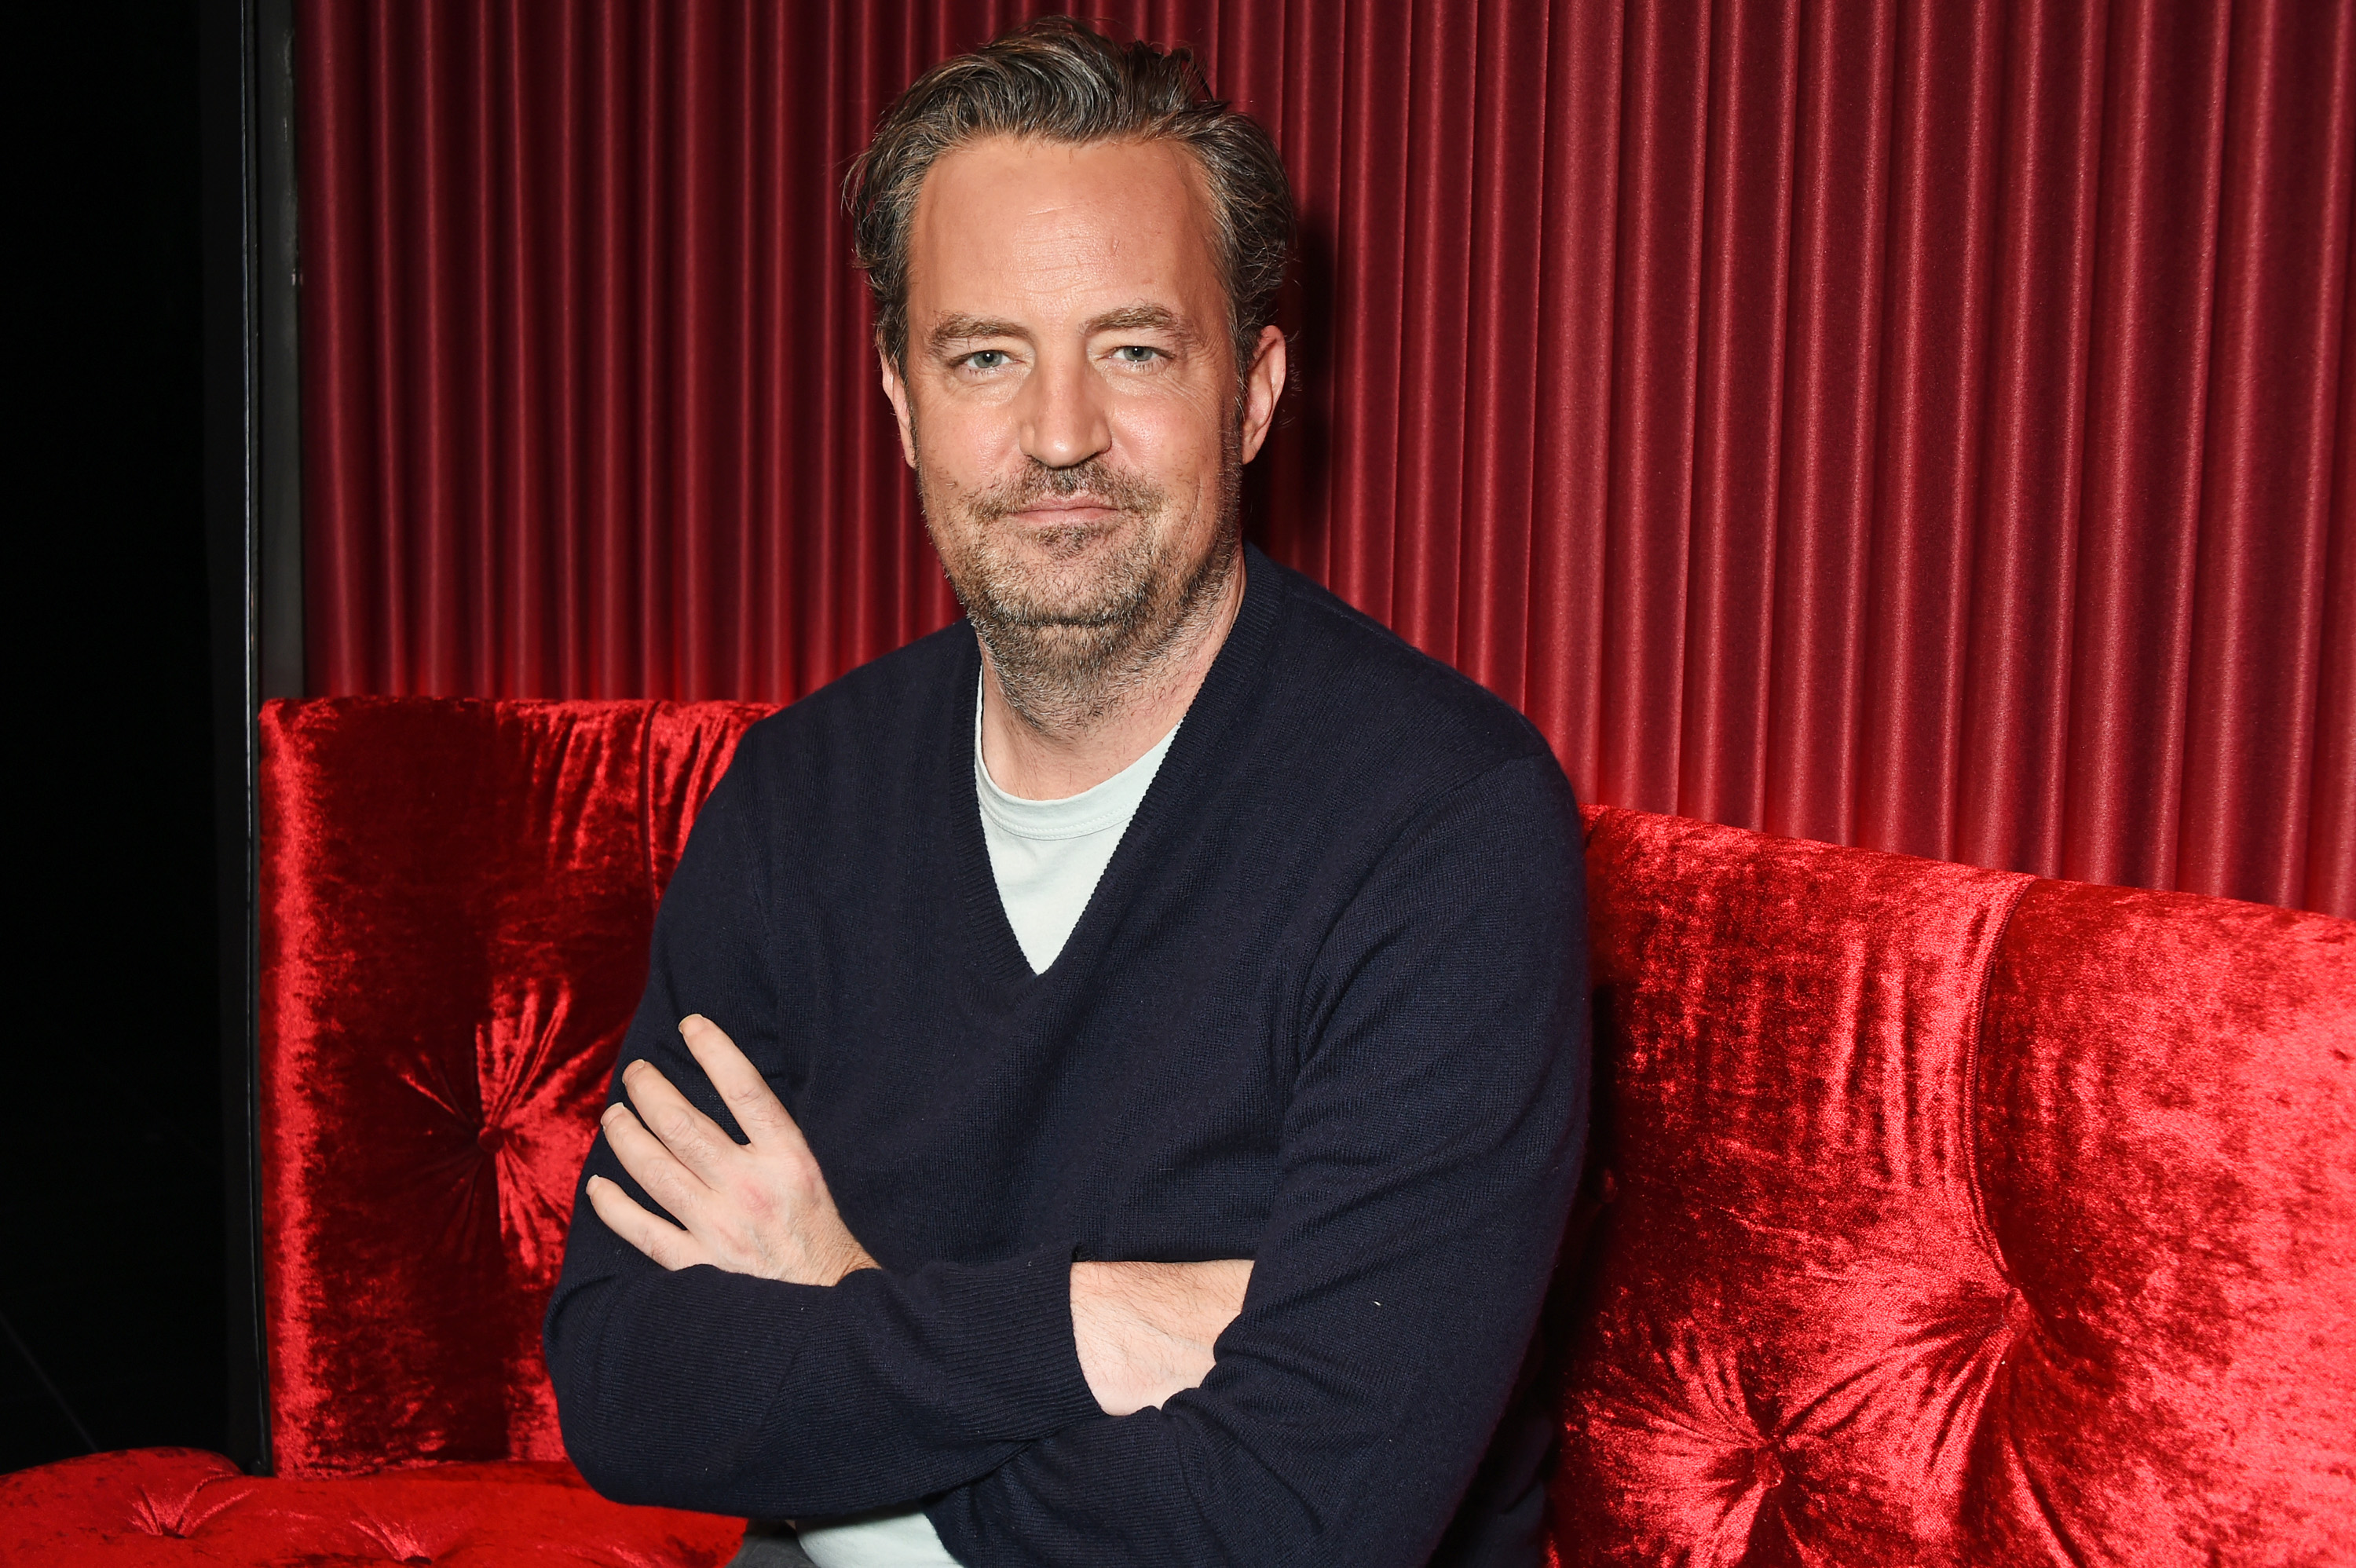 Matthew Perry at a Photocall for the play "The End of Longing," which he wrote and stars in, at The Playhouse Theatre on February 8, 2016 in London, England | Source: Getty Images